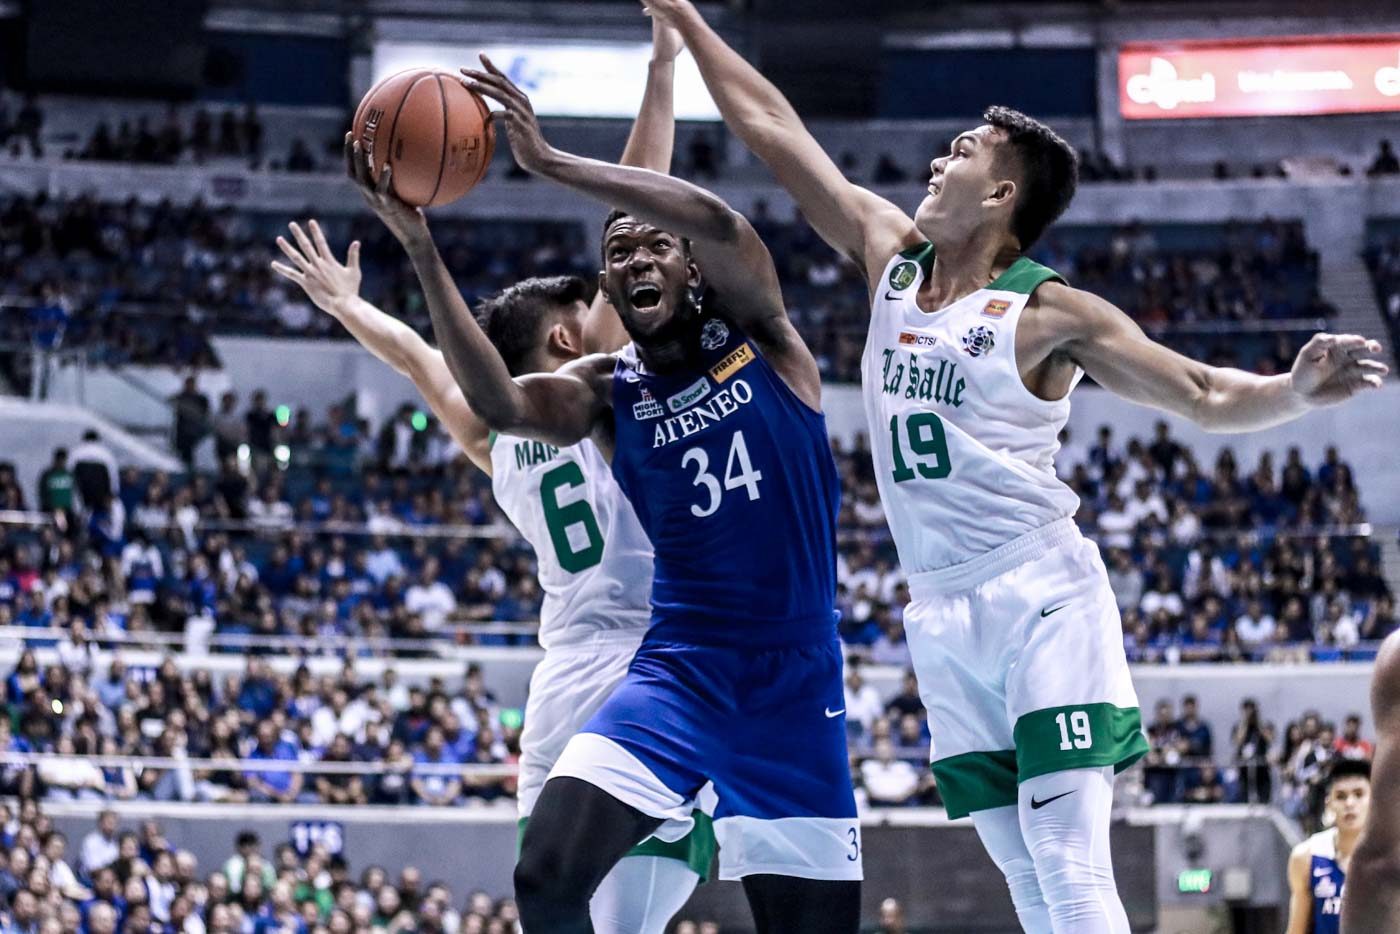 UAAP cancels Season 83 for ‘health and safety’ reasons